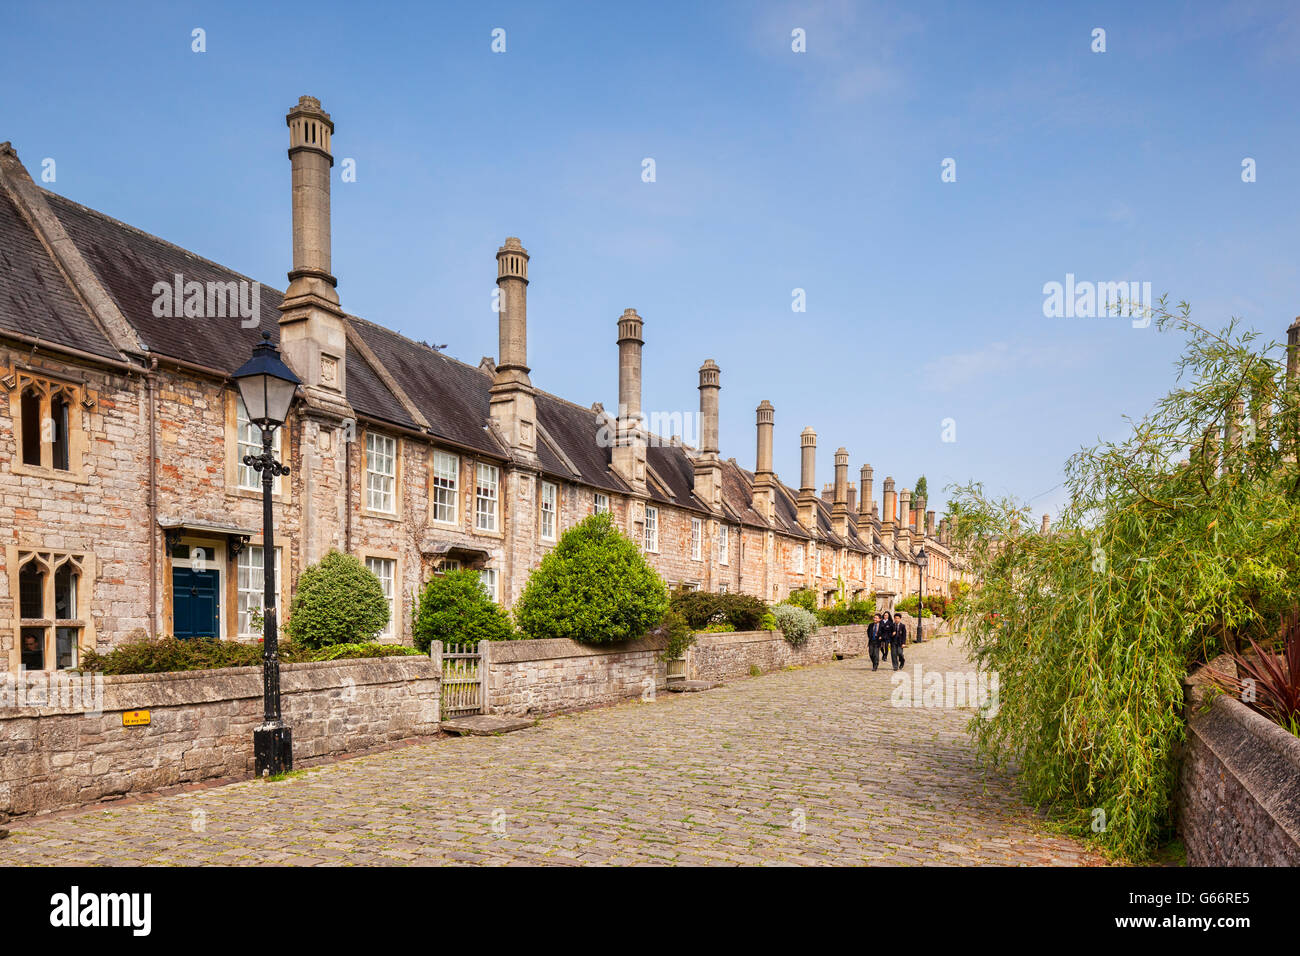 The oldest residential street, with original buildings surviving, in Europe, Vicar's Close, Wells. Somerset, England, UK Stock Photo